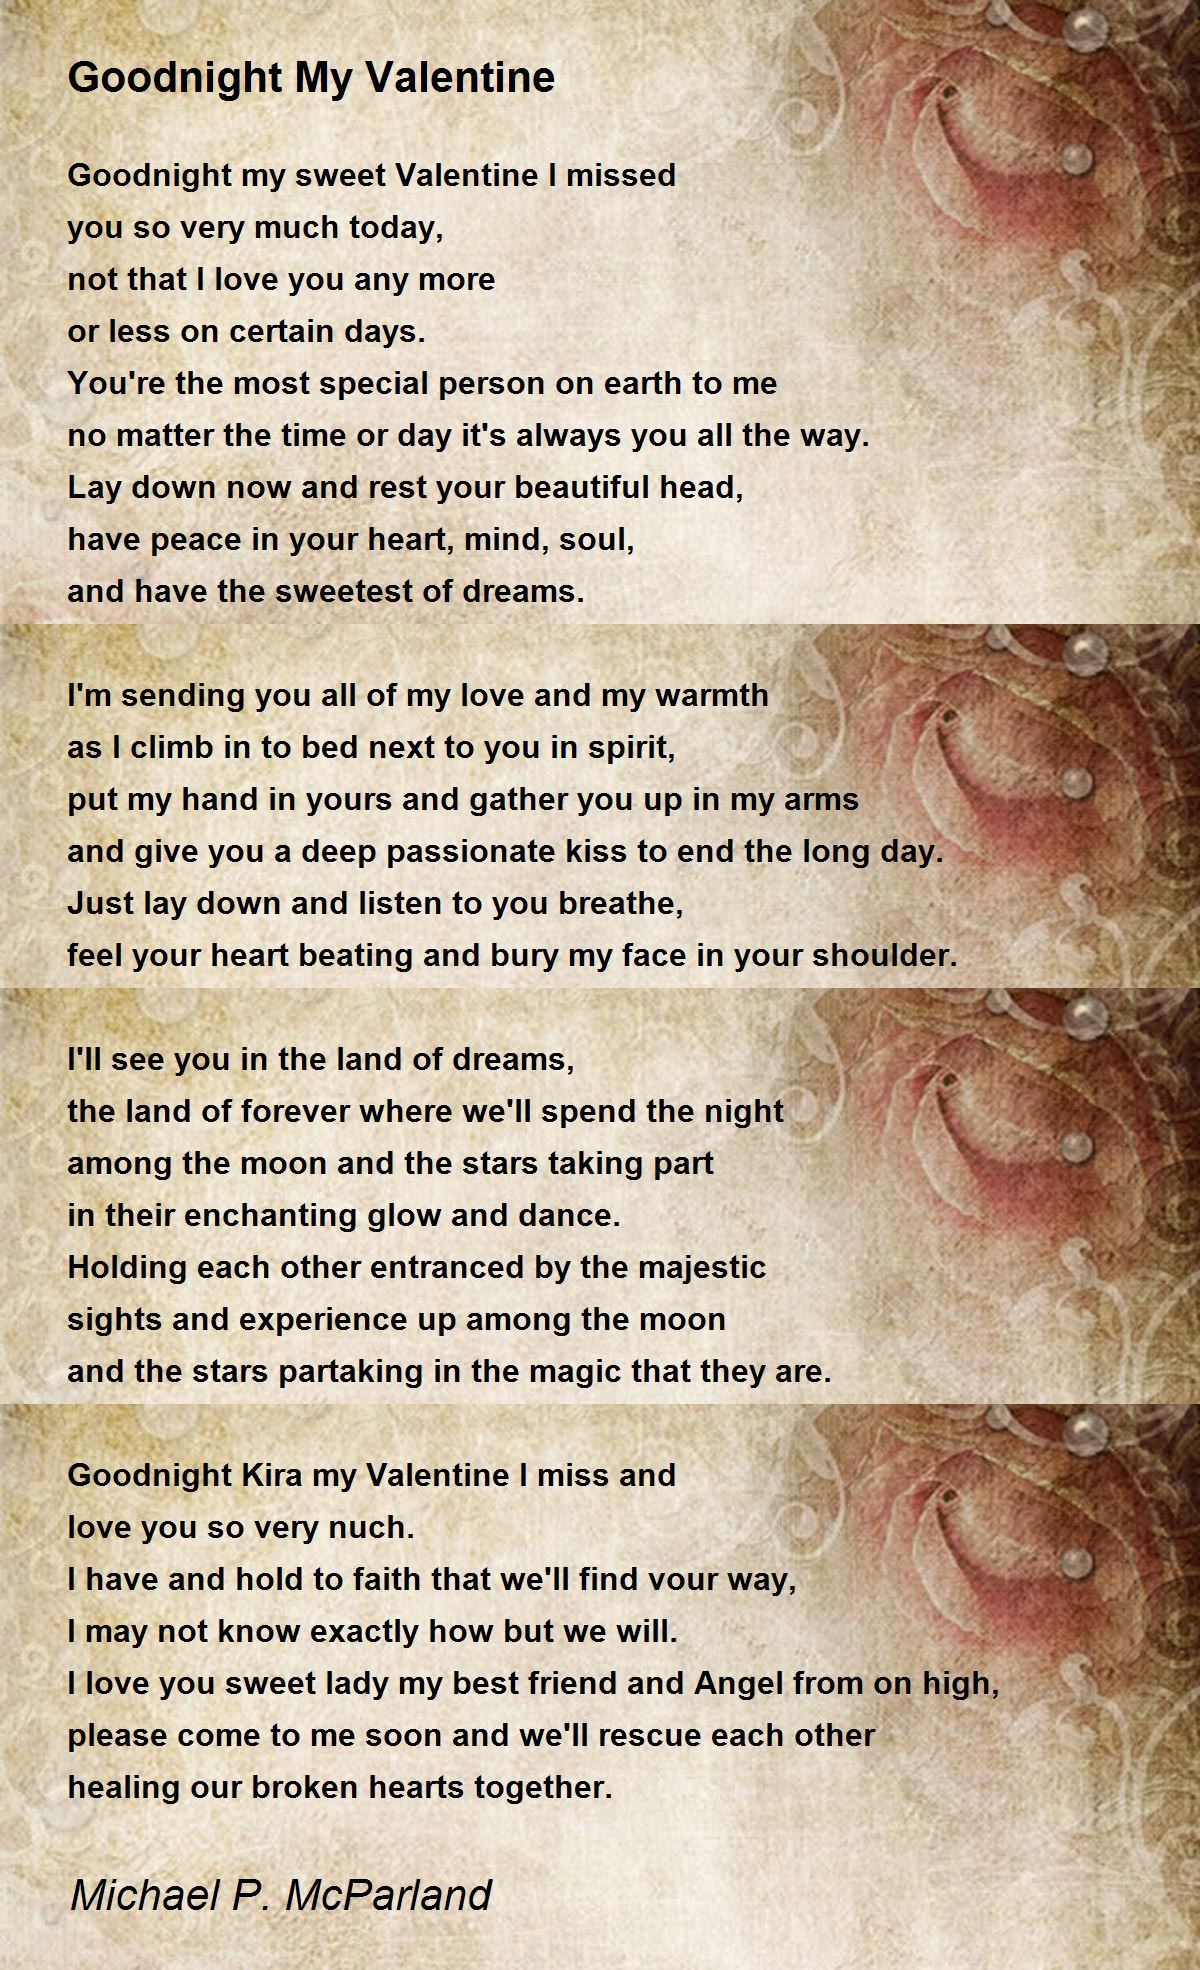 Goodnight My Valentine - Goodnight My Valentine Poem by Michael P ...